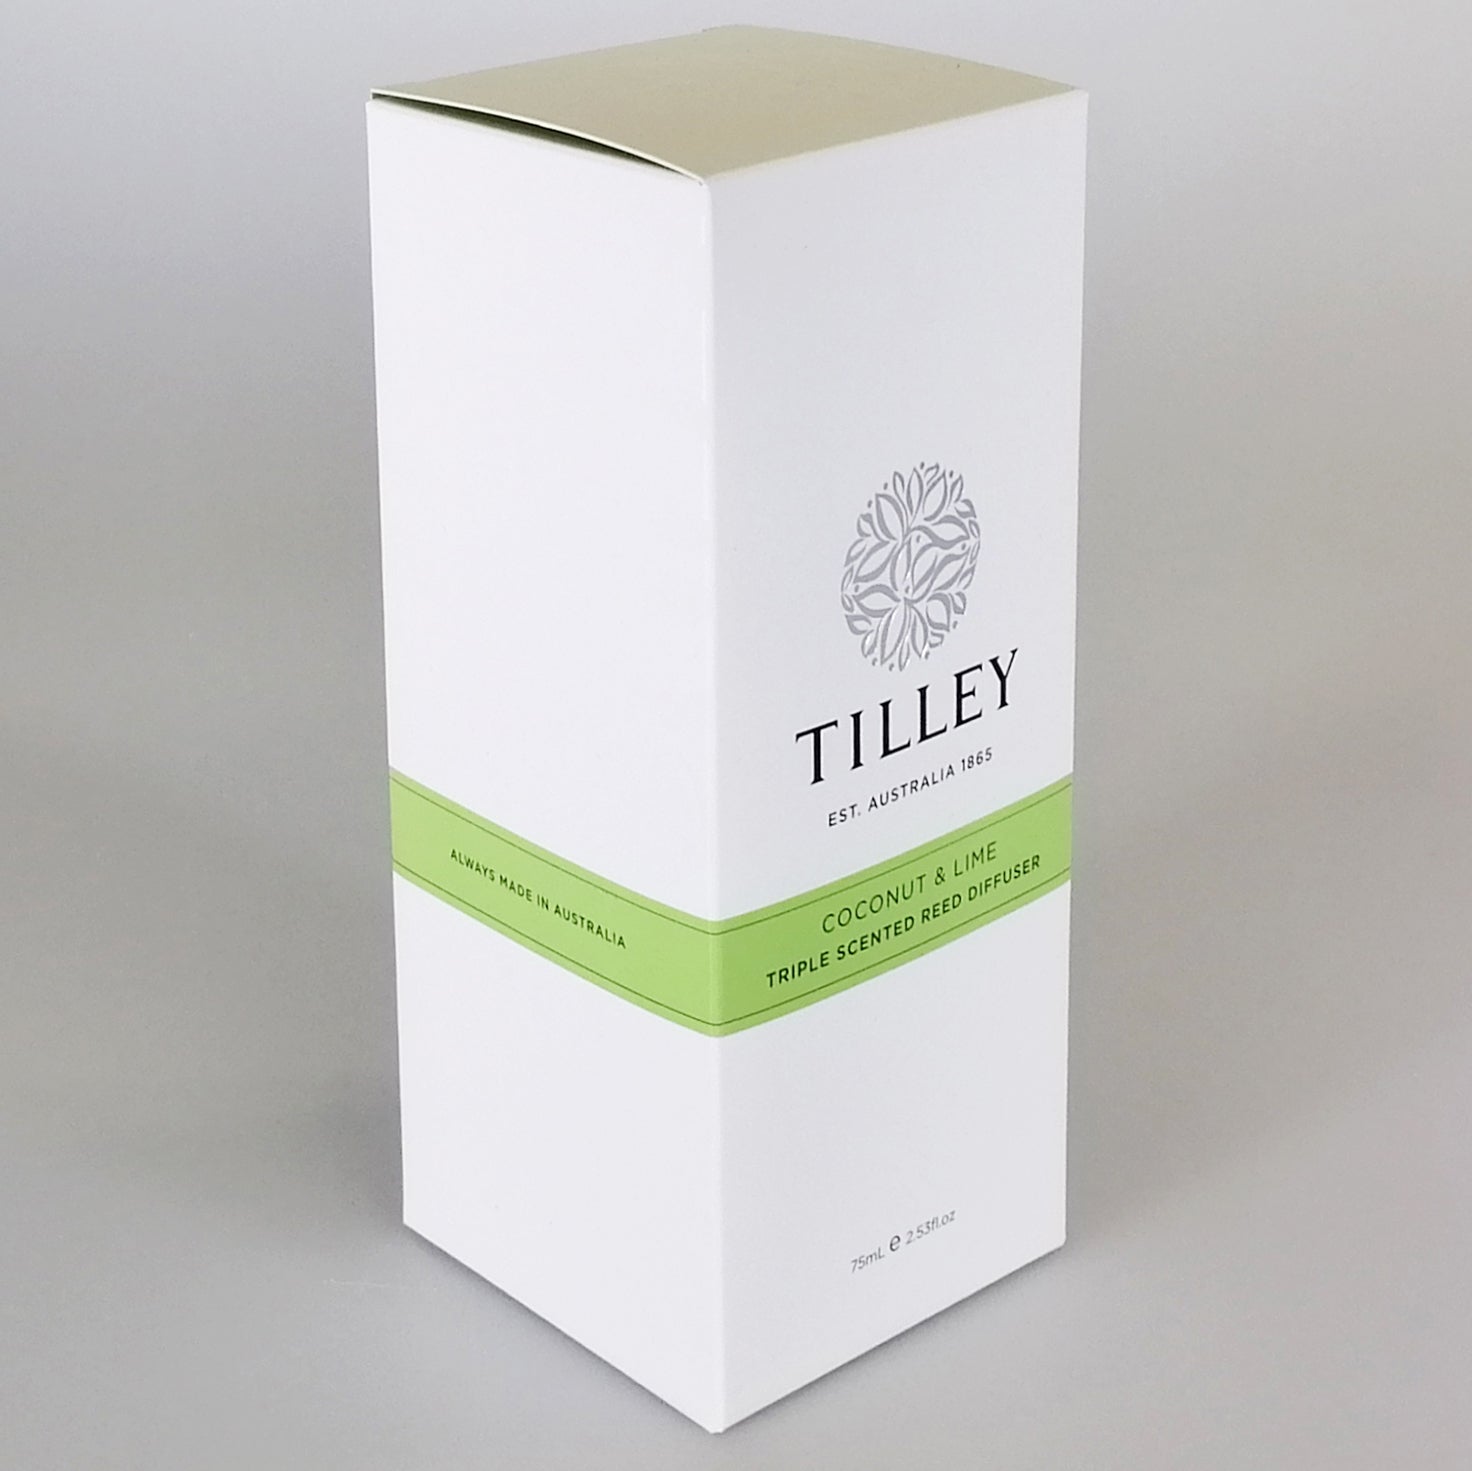 Tilley Reed Diffuser - Coconut & Lime - 75ml